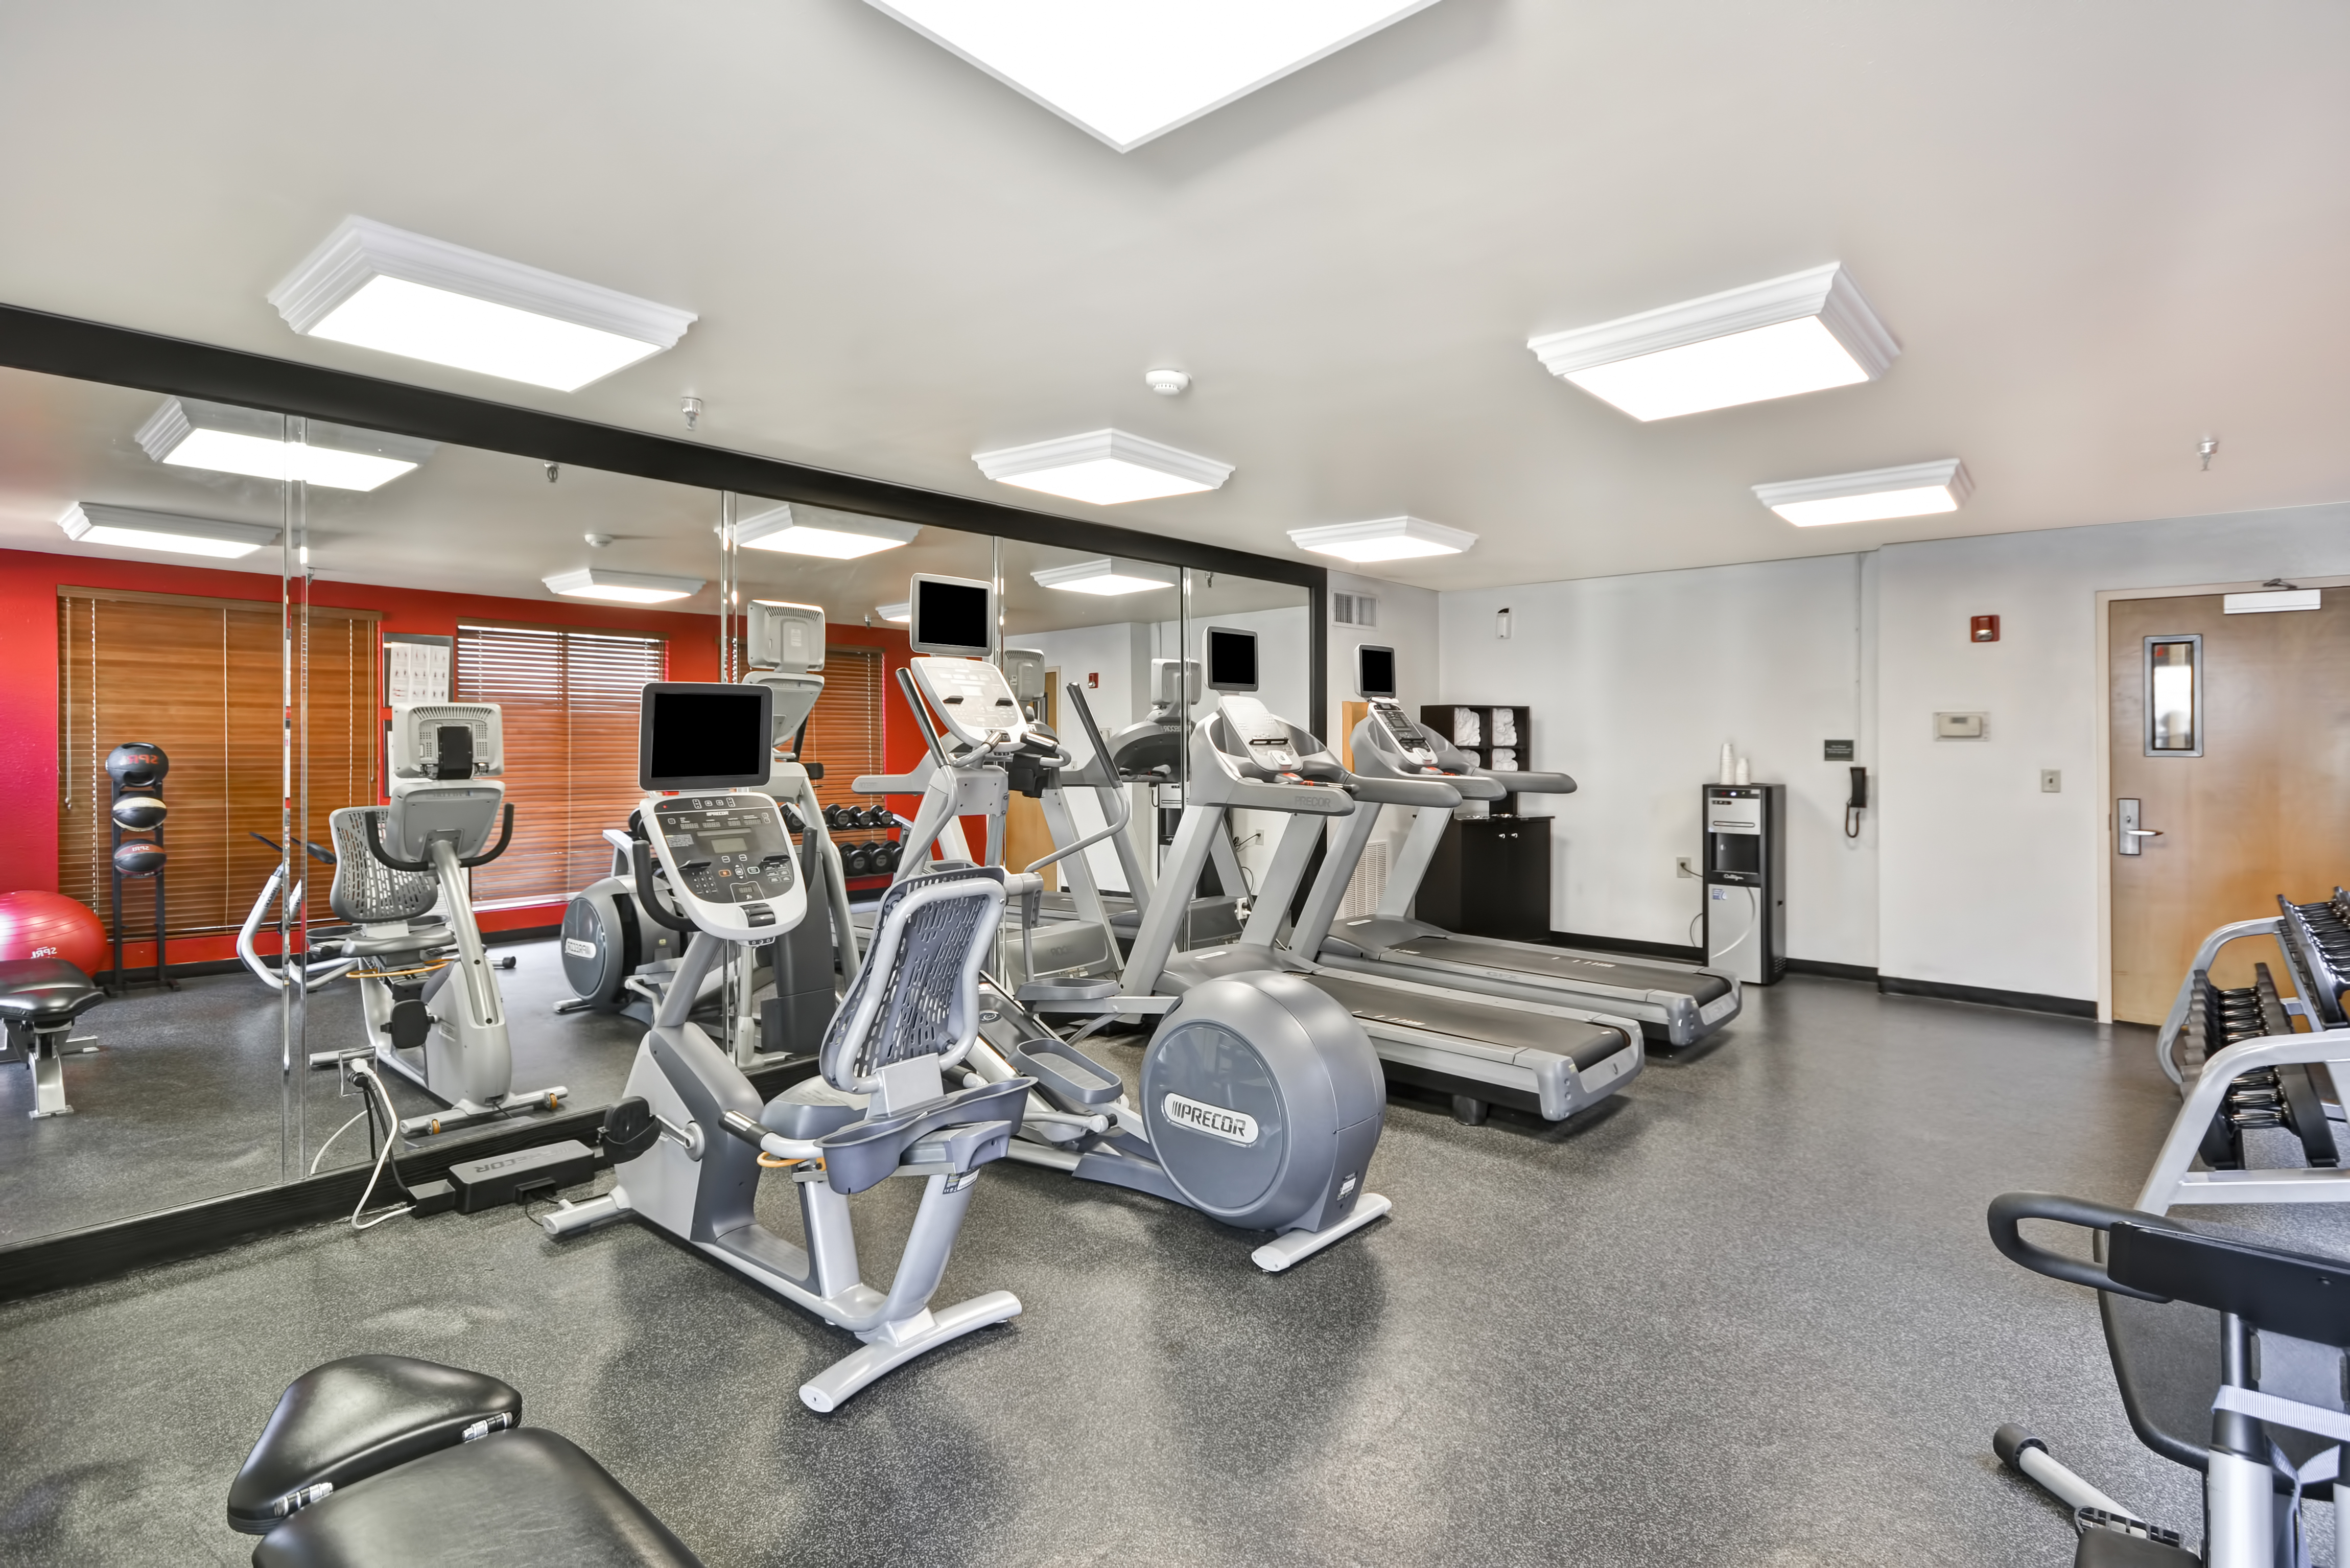 Fitness Center with treadmills, weights, and other equipment. 